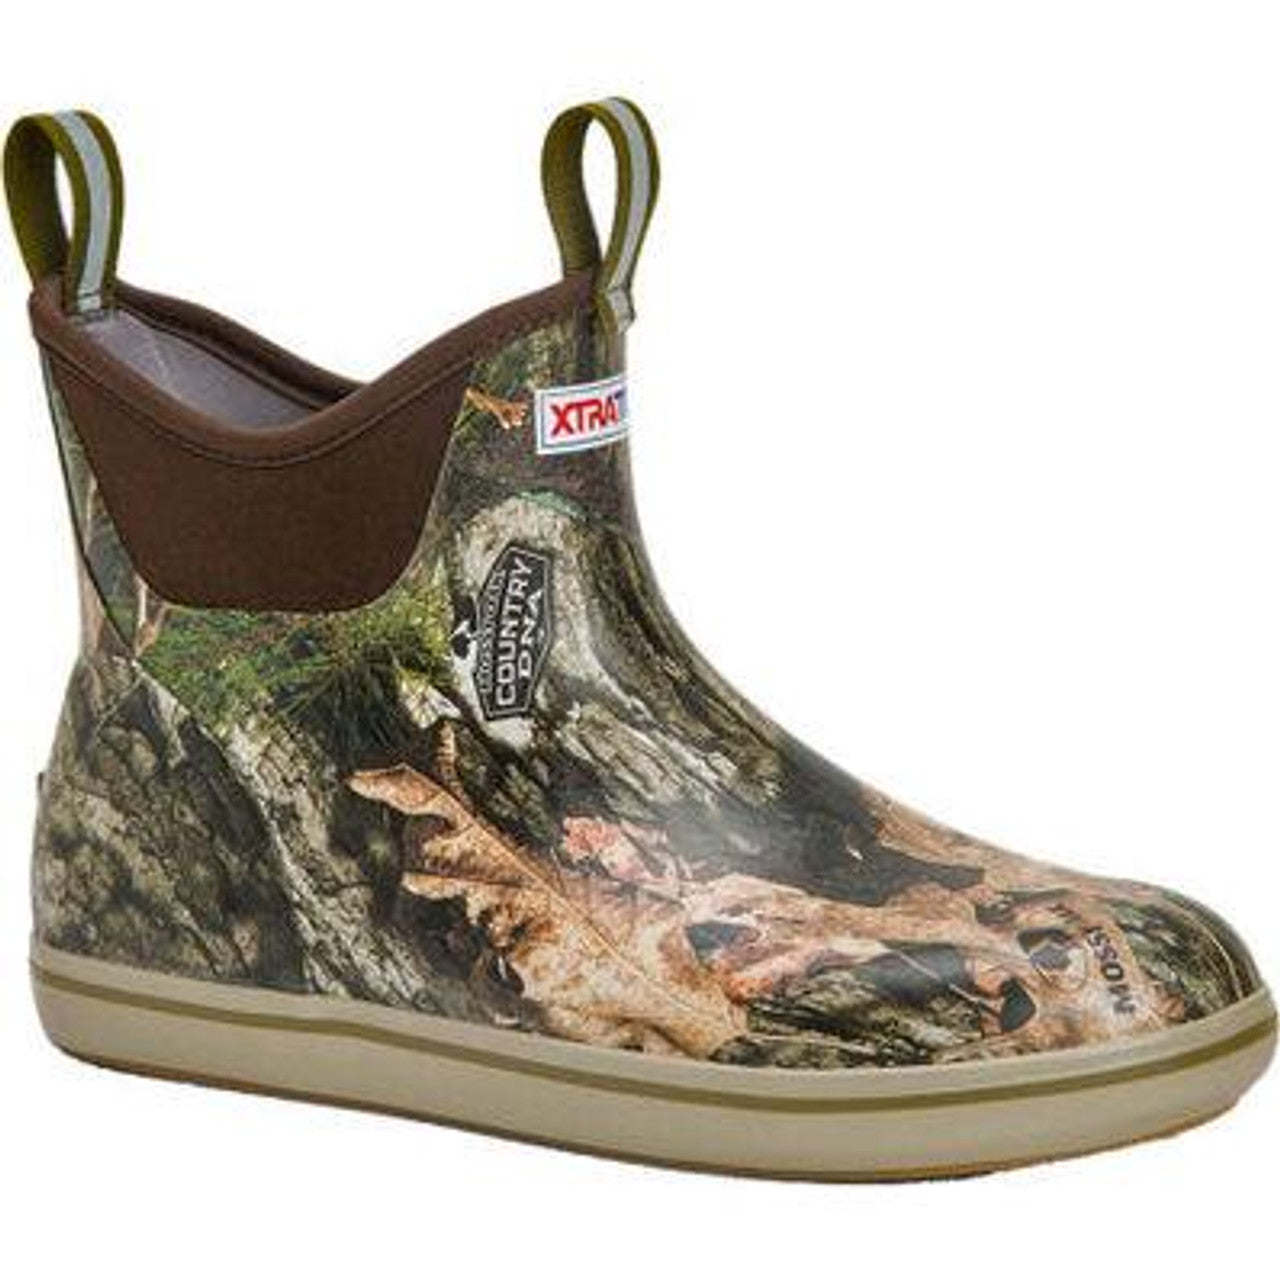 Xtratuf M Ankle Deck Boot 6” MOSSY OAK COUNTRY DNA